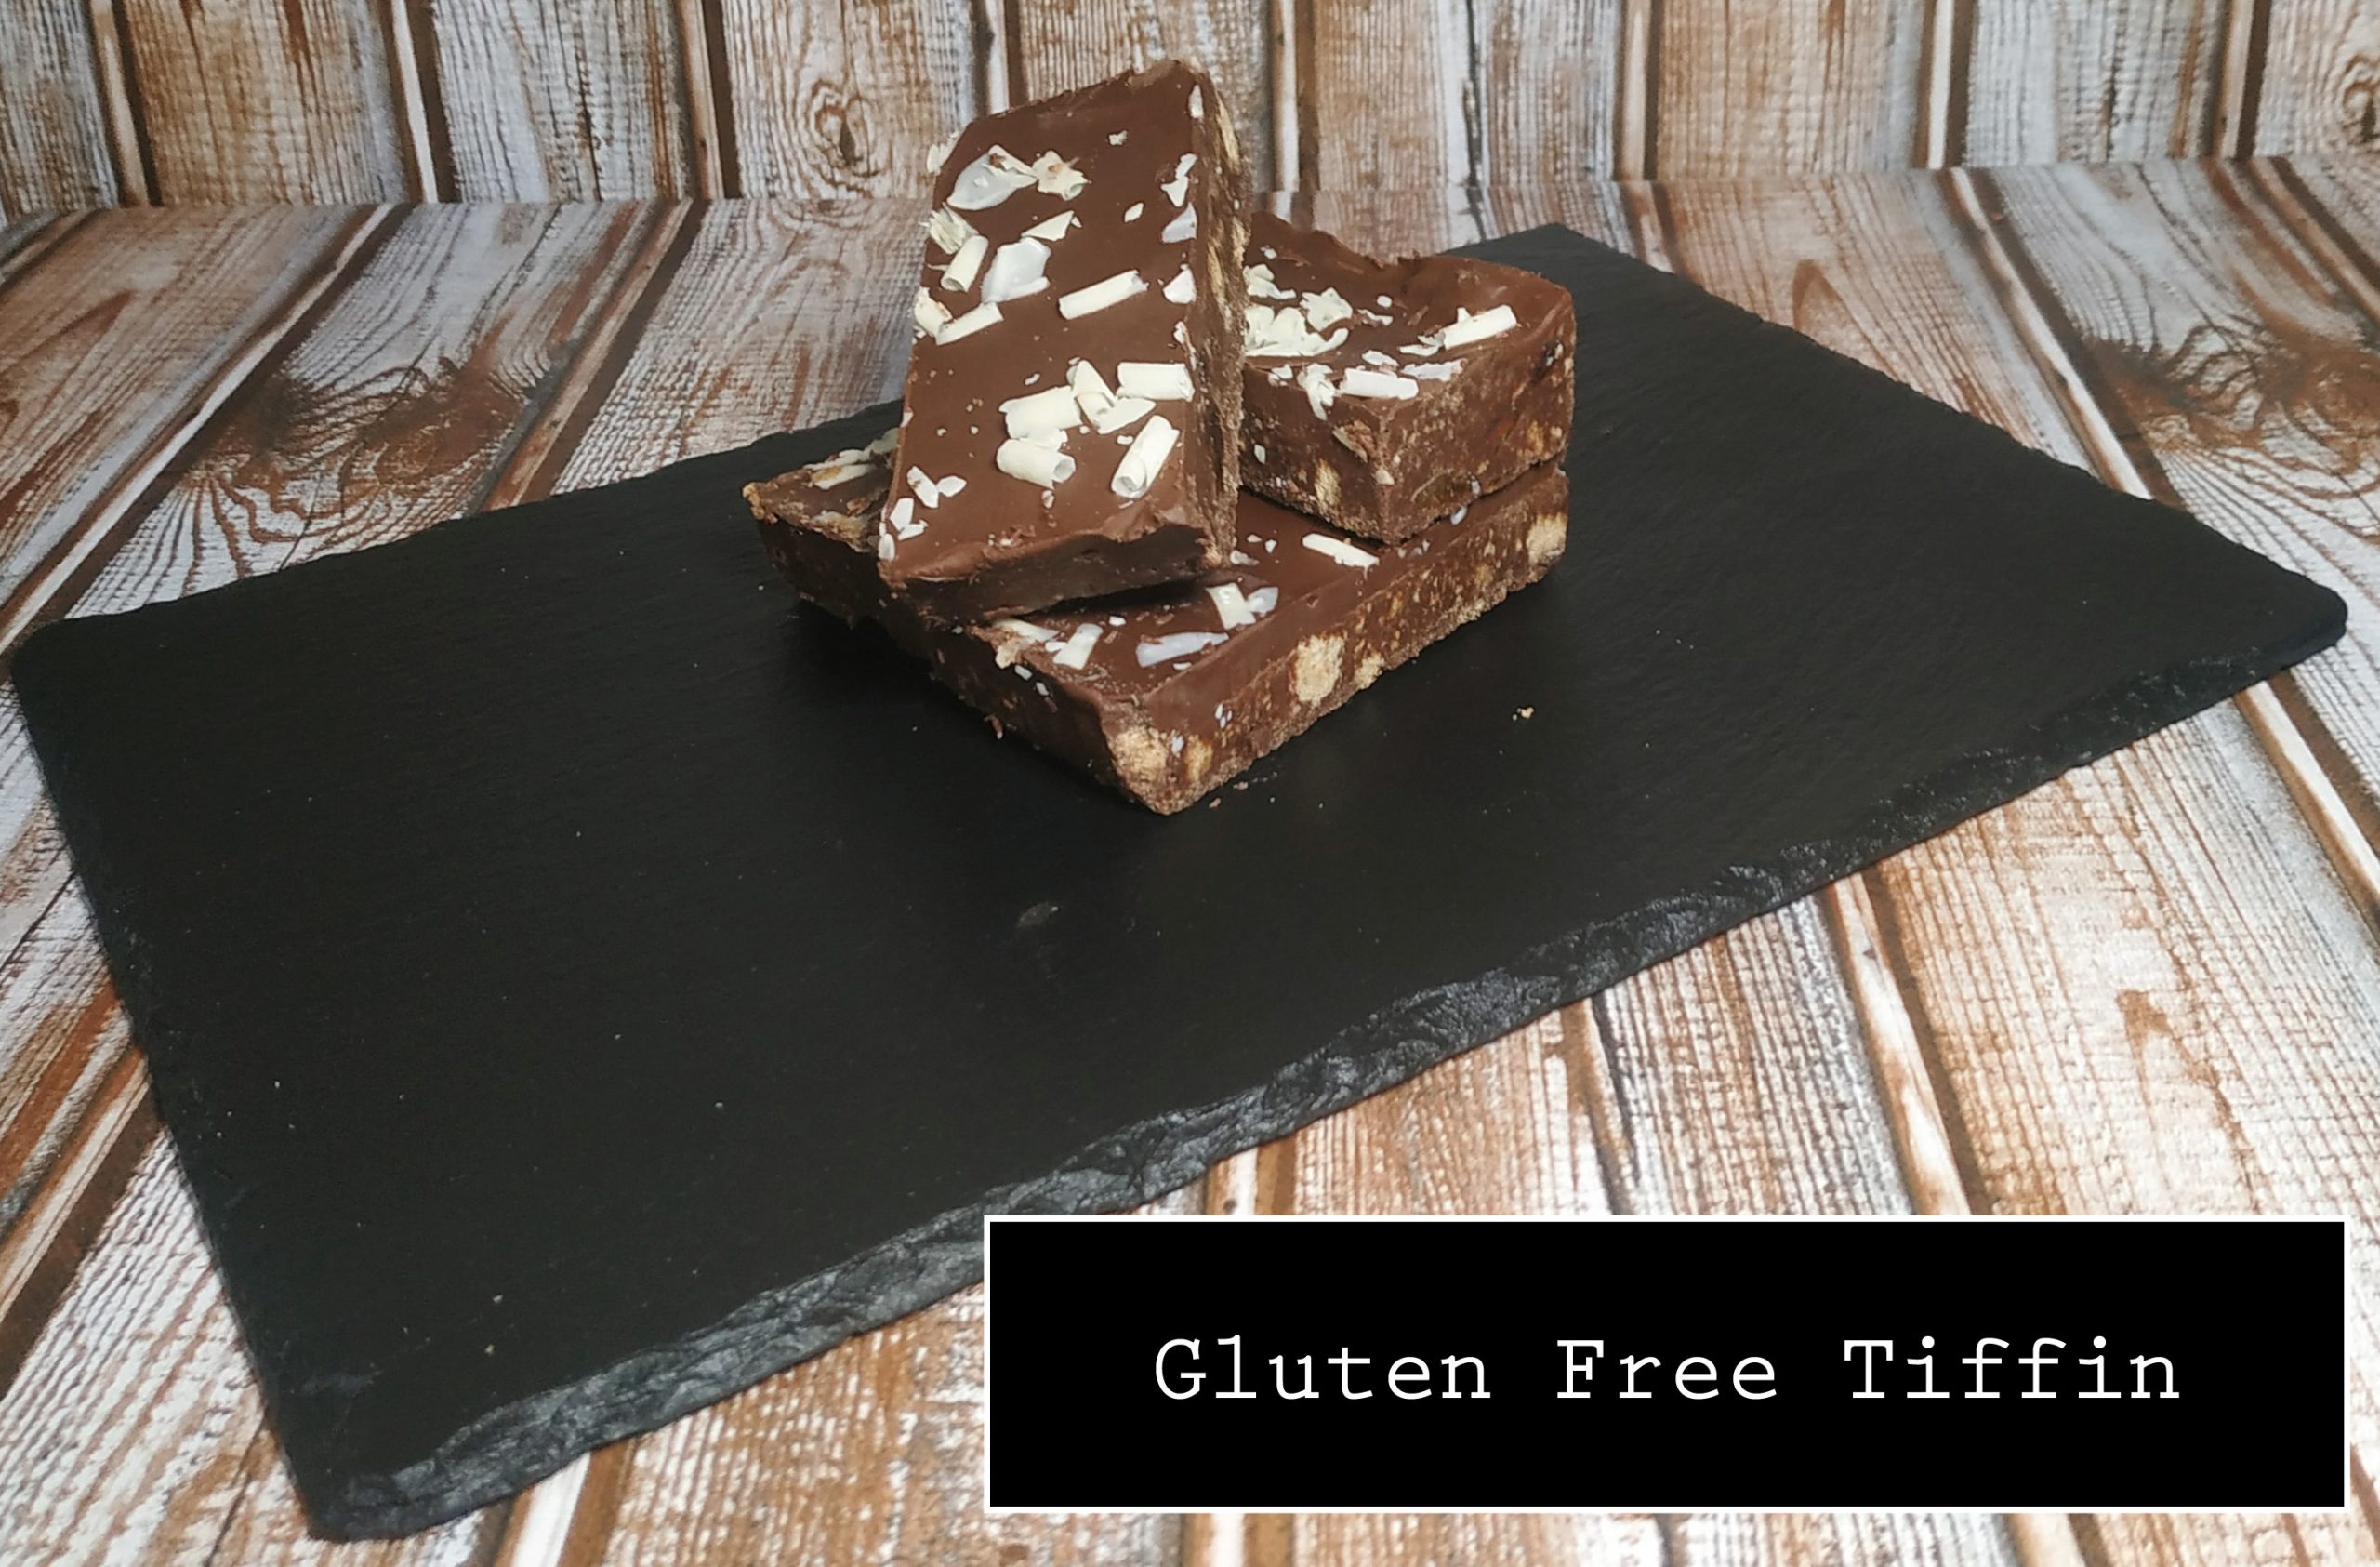 Gluten Free Tiffin Bars by Sandwich in the Square